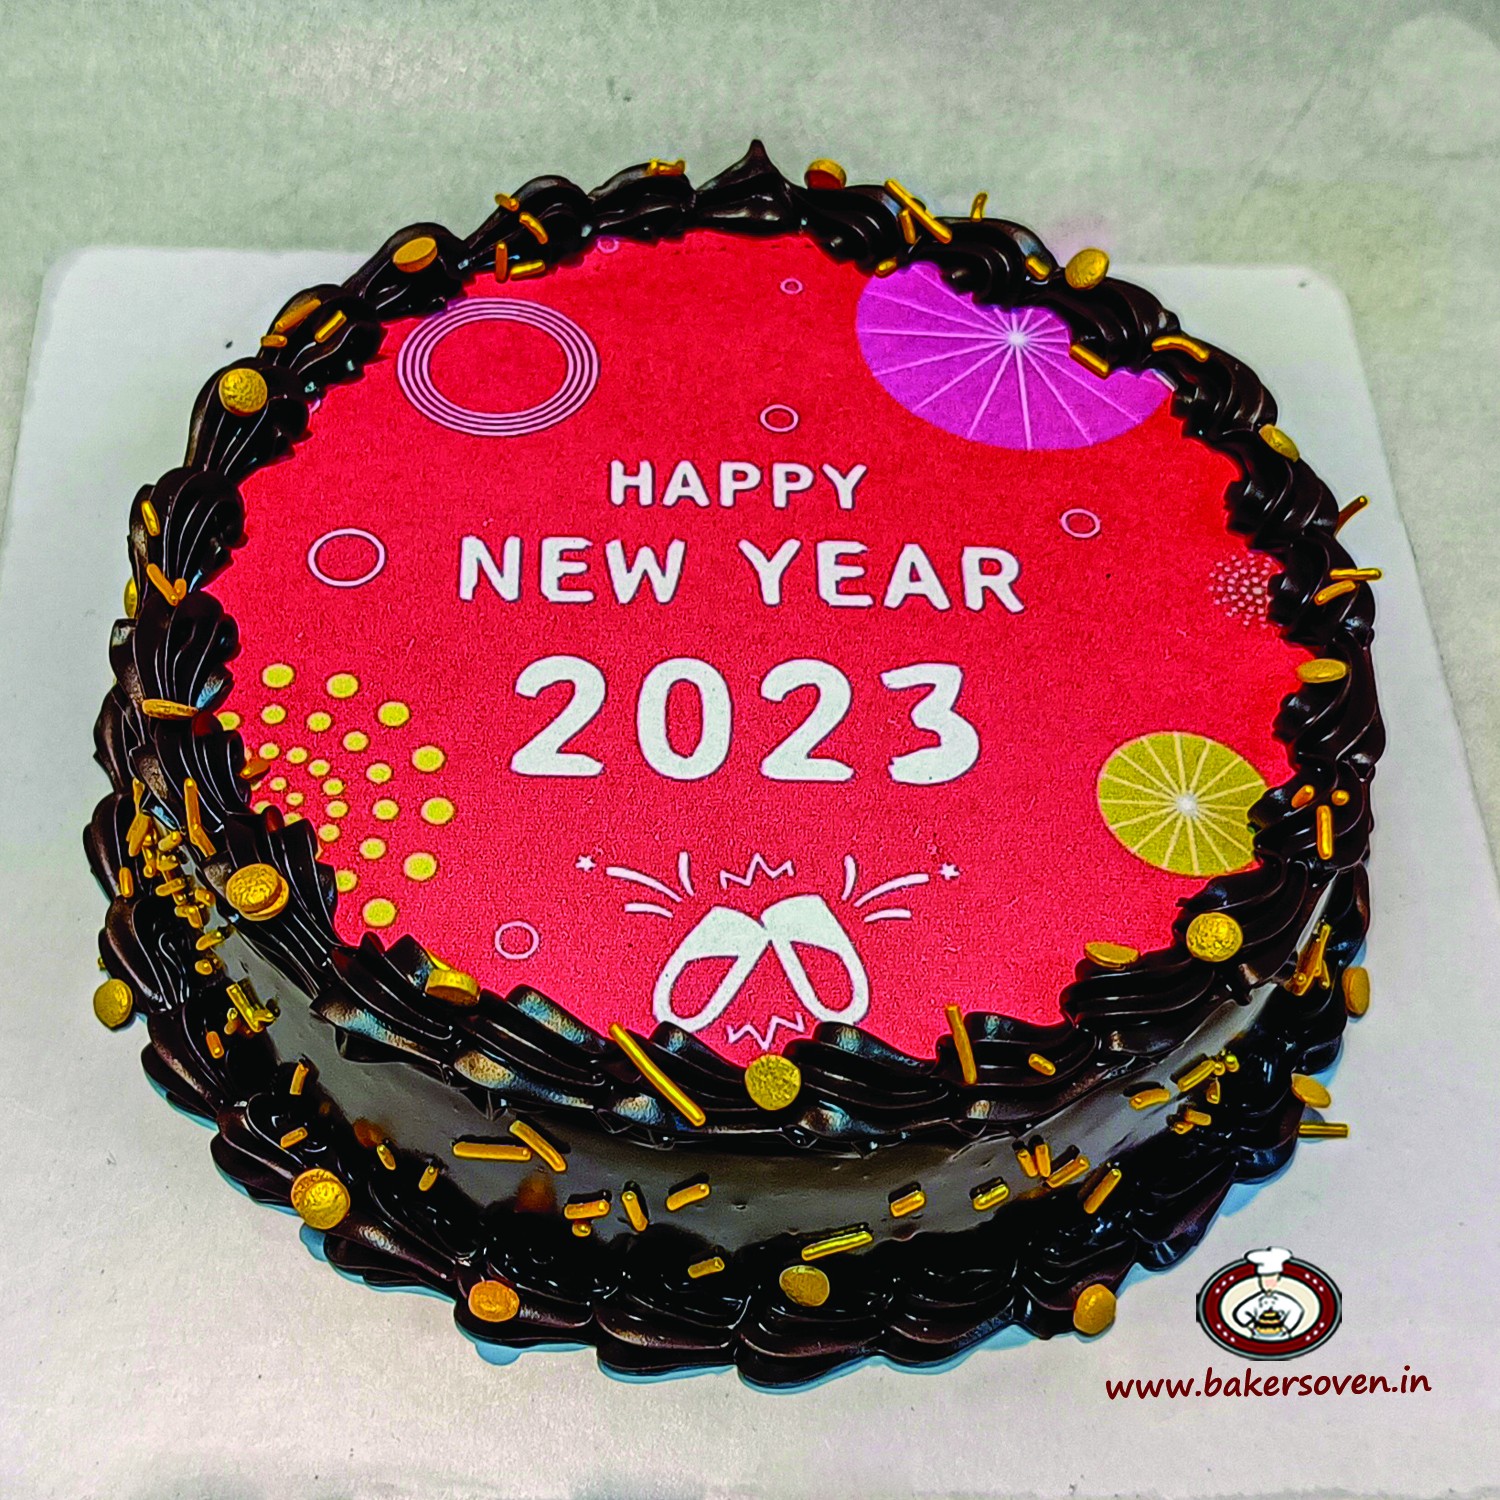 2022 Happy New Year Cake Topper - Gold Glitter Stars Cheers To 2022 Cake  Topper - Hello 2022 2022 New Years Eve - Merry Christmas - Winter Festive  Holidays Party Decoration - Walmart.com